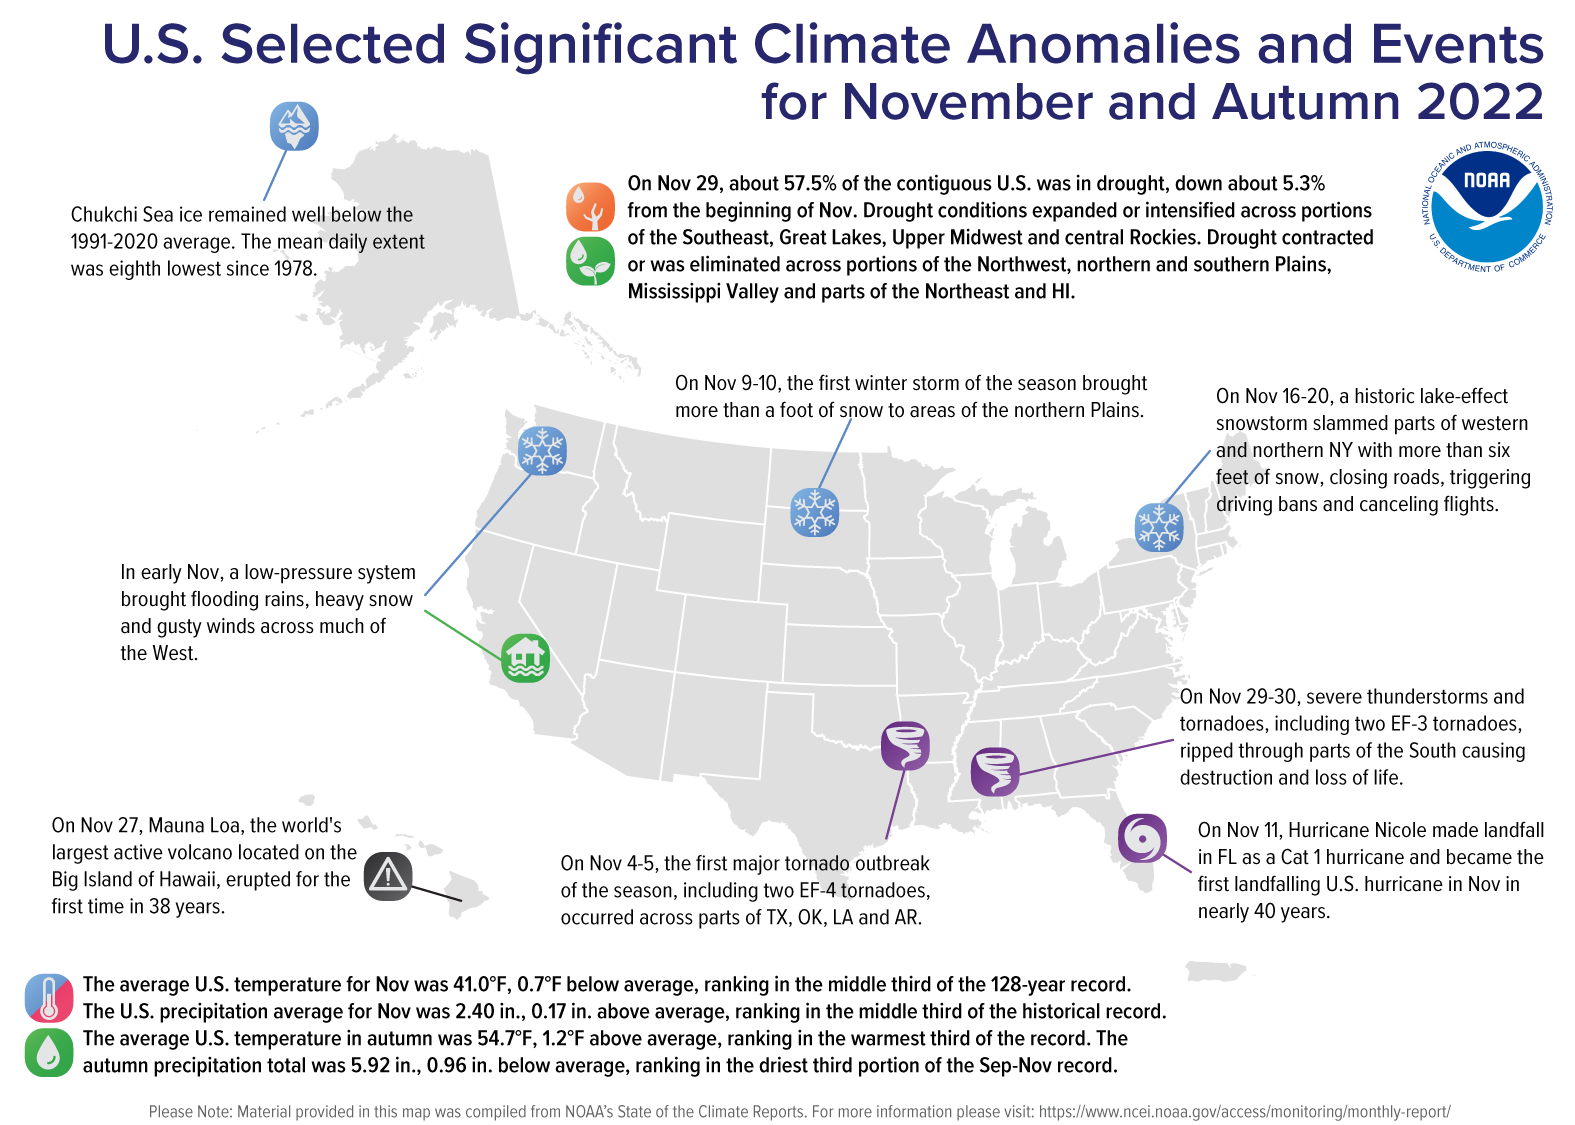 A map of the United States plotted with significant climate events that occurred during November and Autumn 2022.